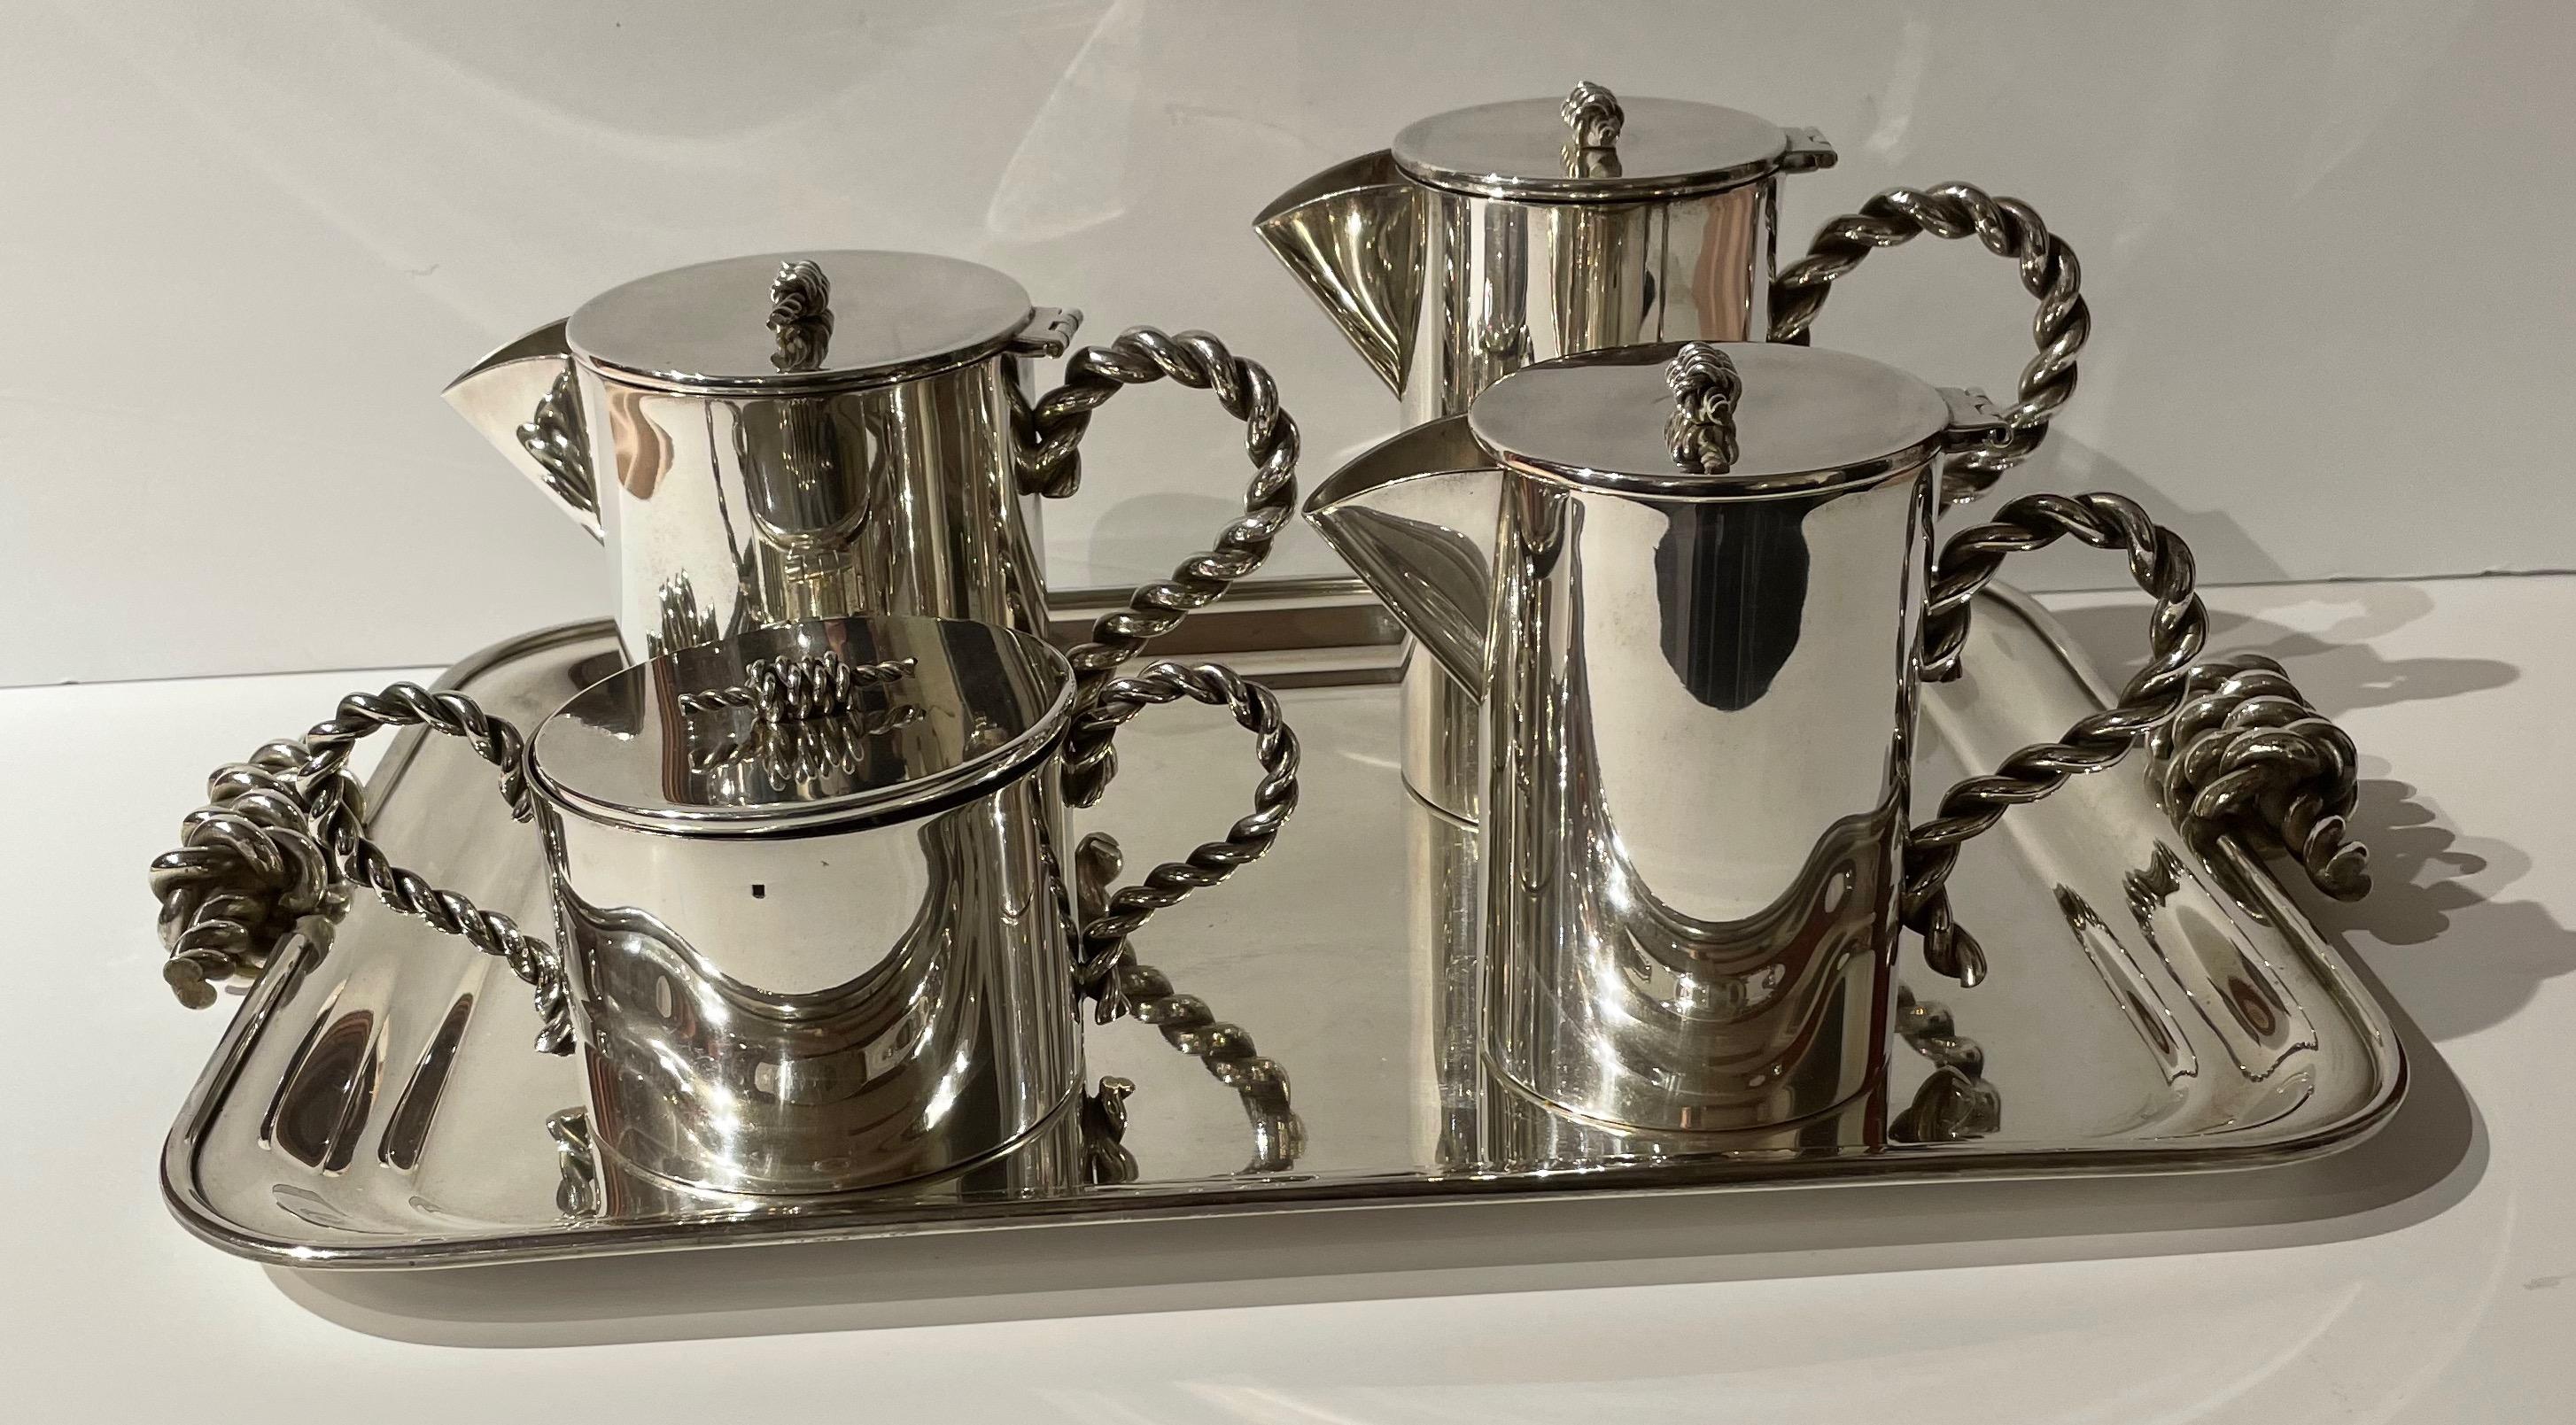 Coffee tea set and tray Art Deco newly restored fresh silver plate. An unusual design with a rope chain created for all handles gives this set a special point of view. Each piece represents an aspect of this design. Strong construction which is